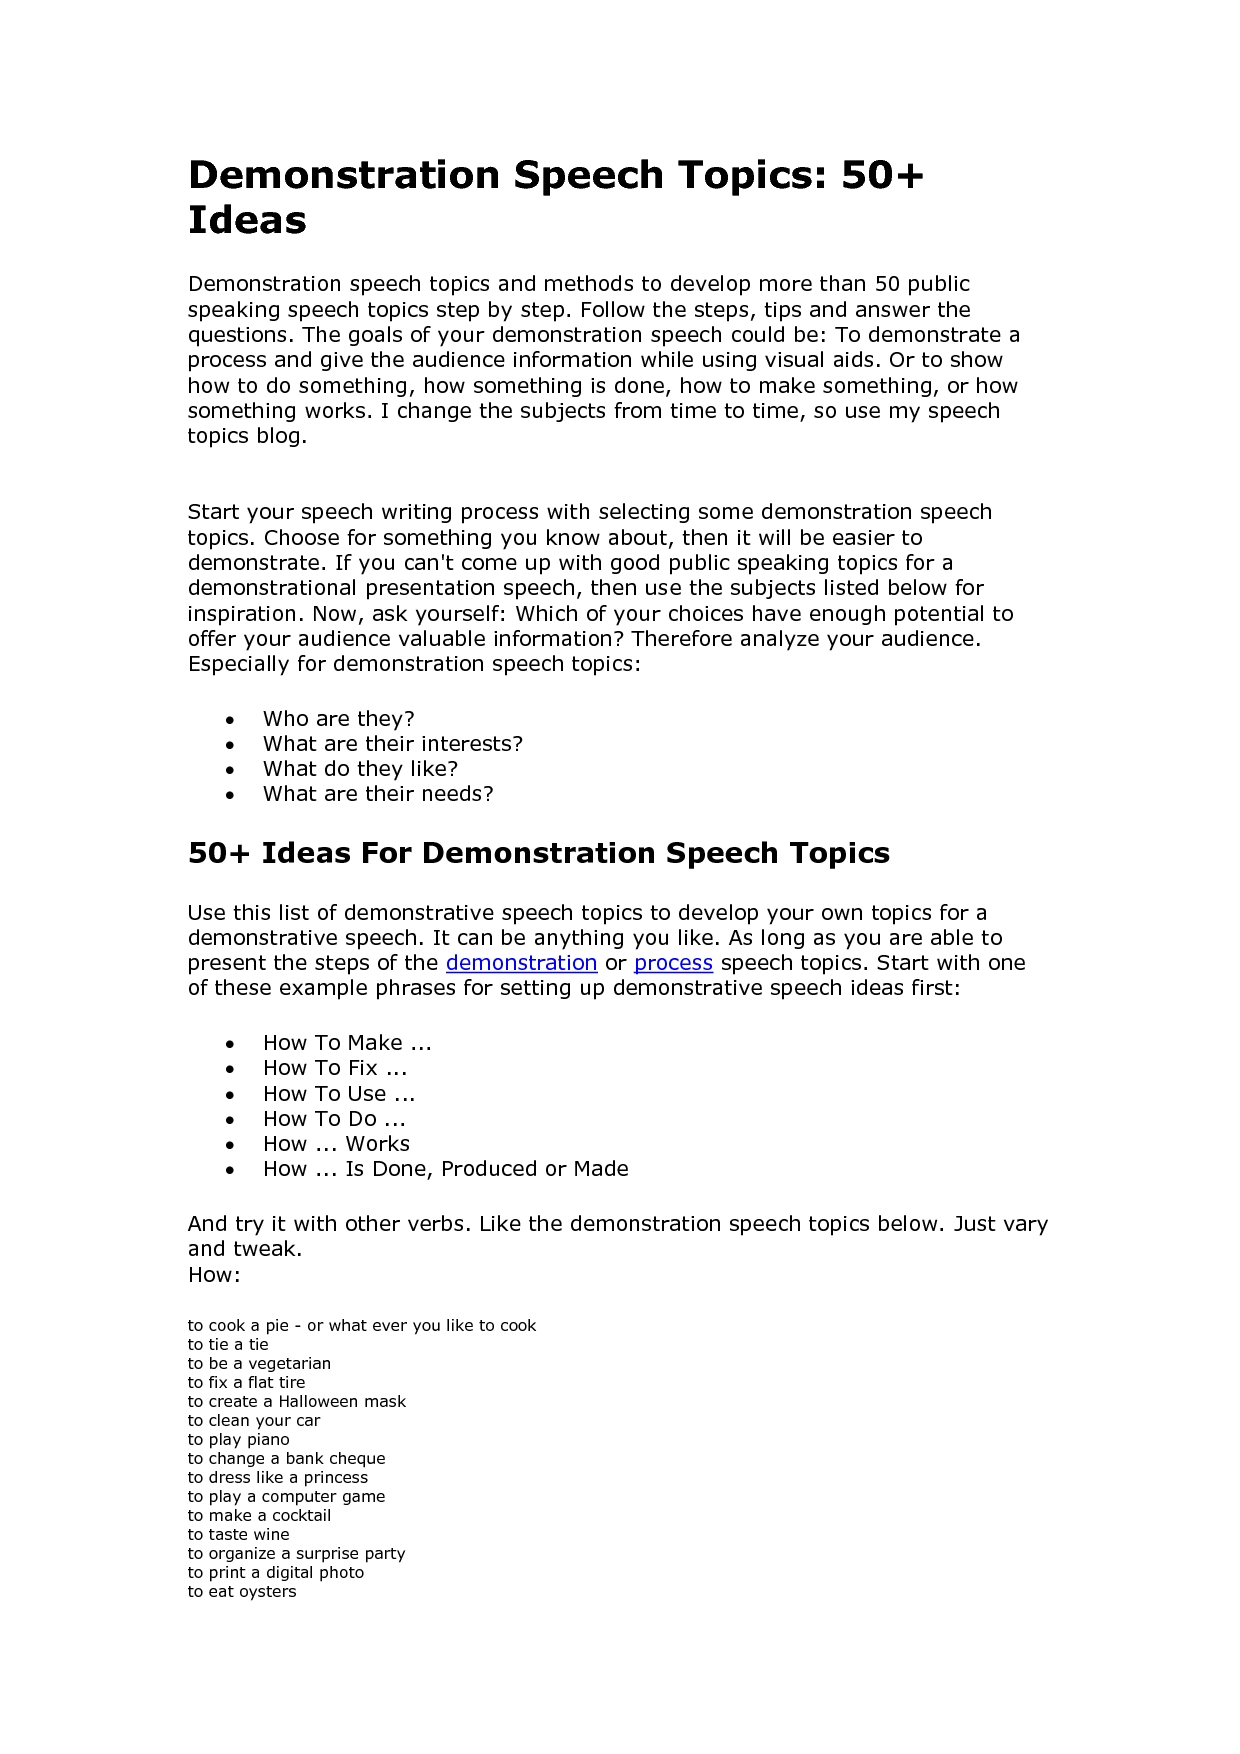 10 Awesome Demonstration Speech Ideas For College outline demonstration speech topics google search school 3 2022